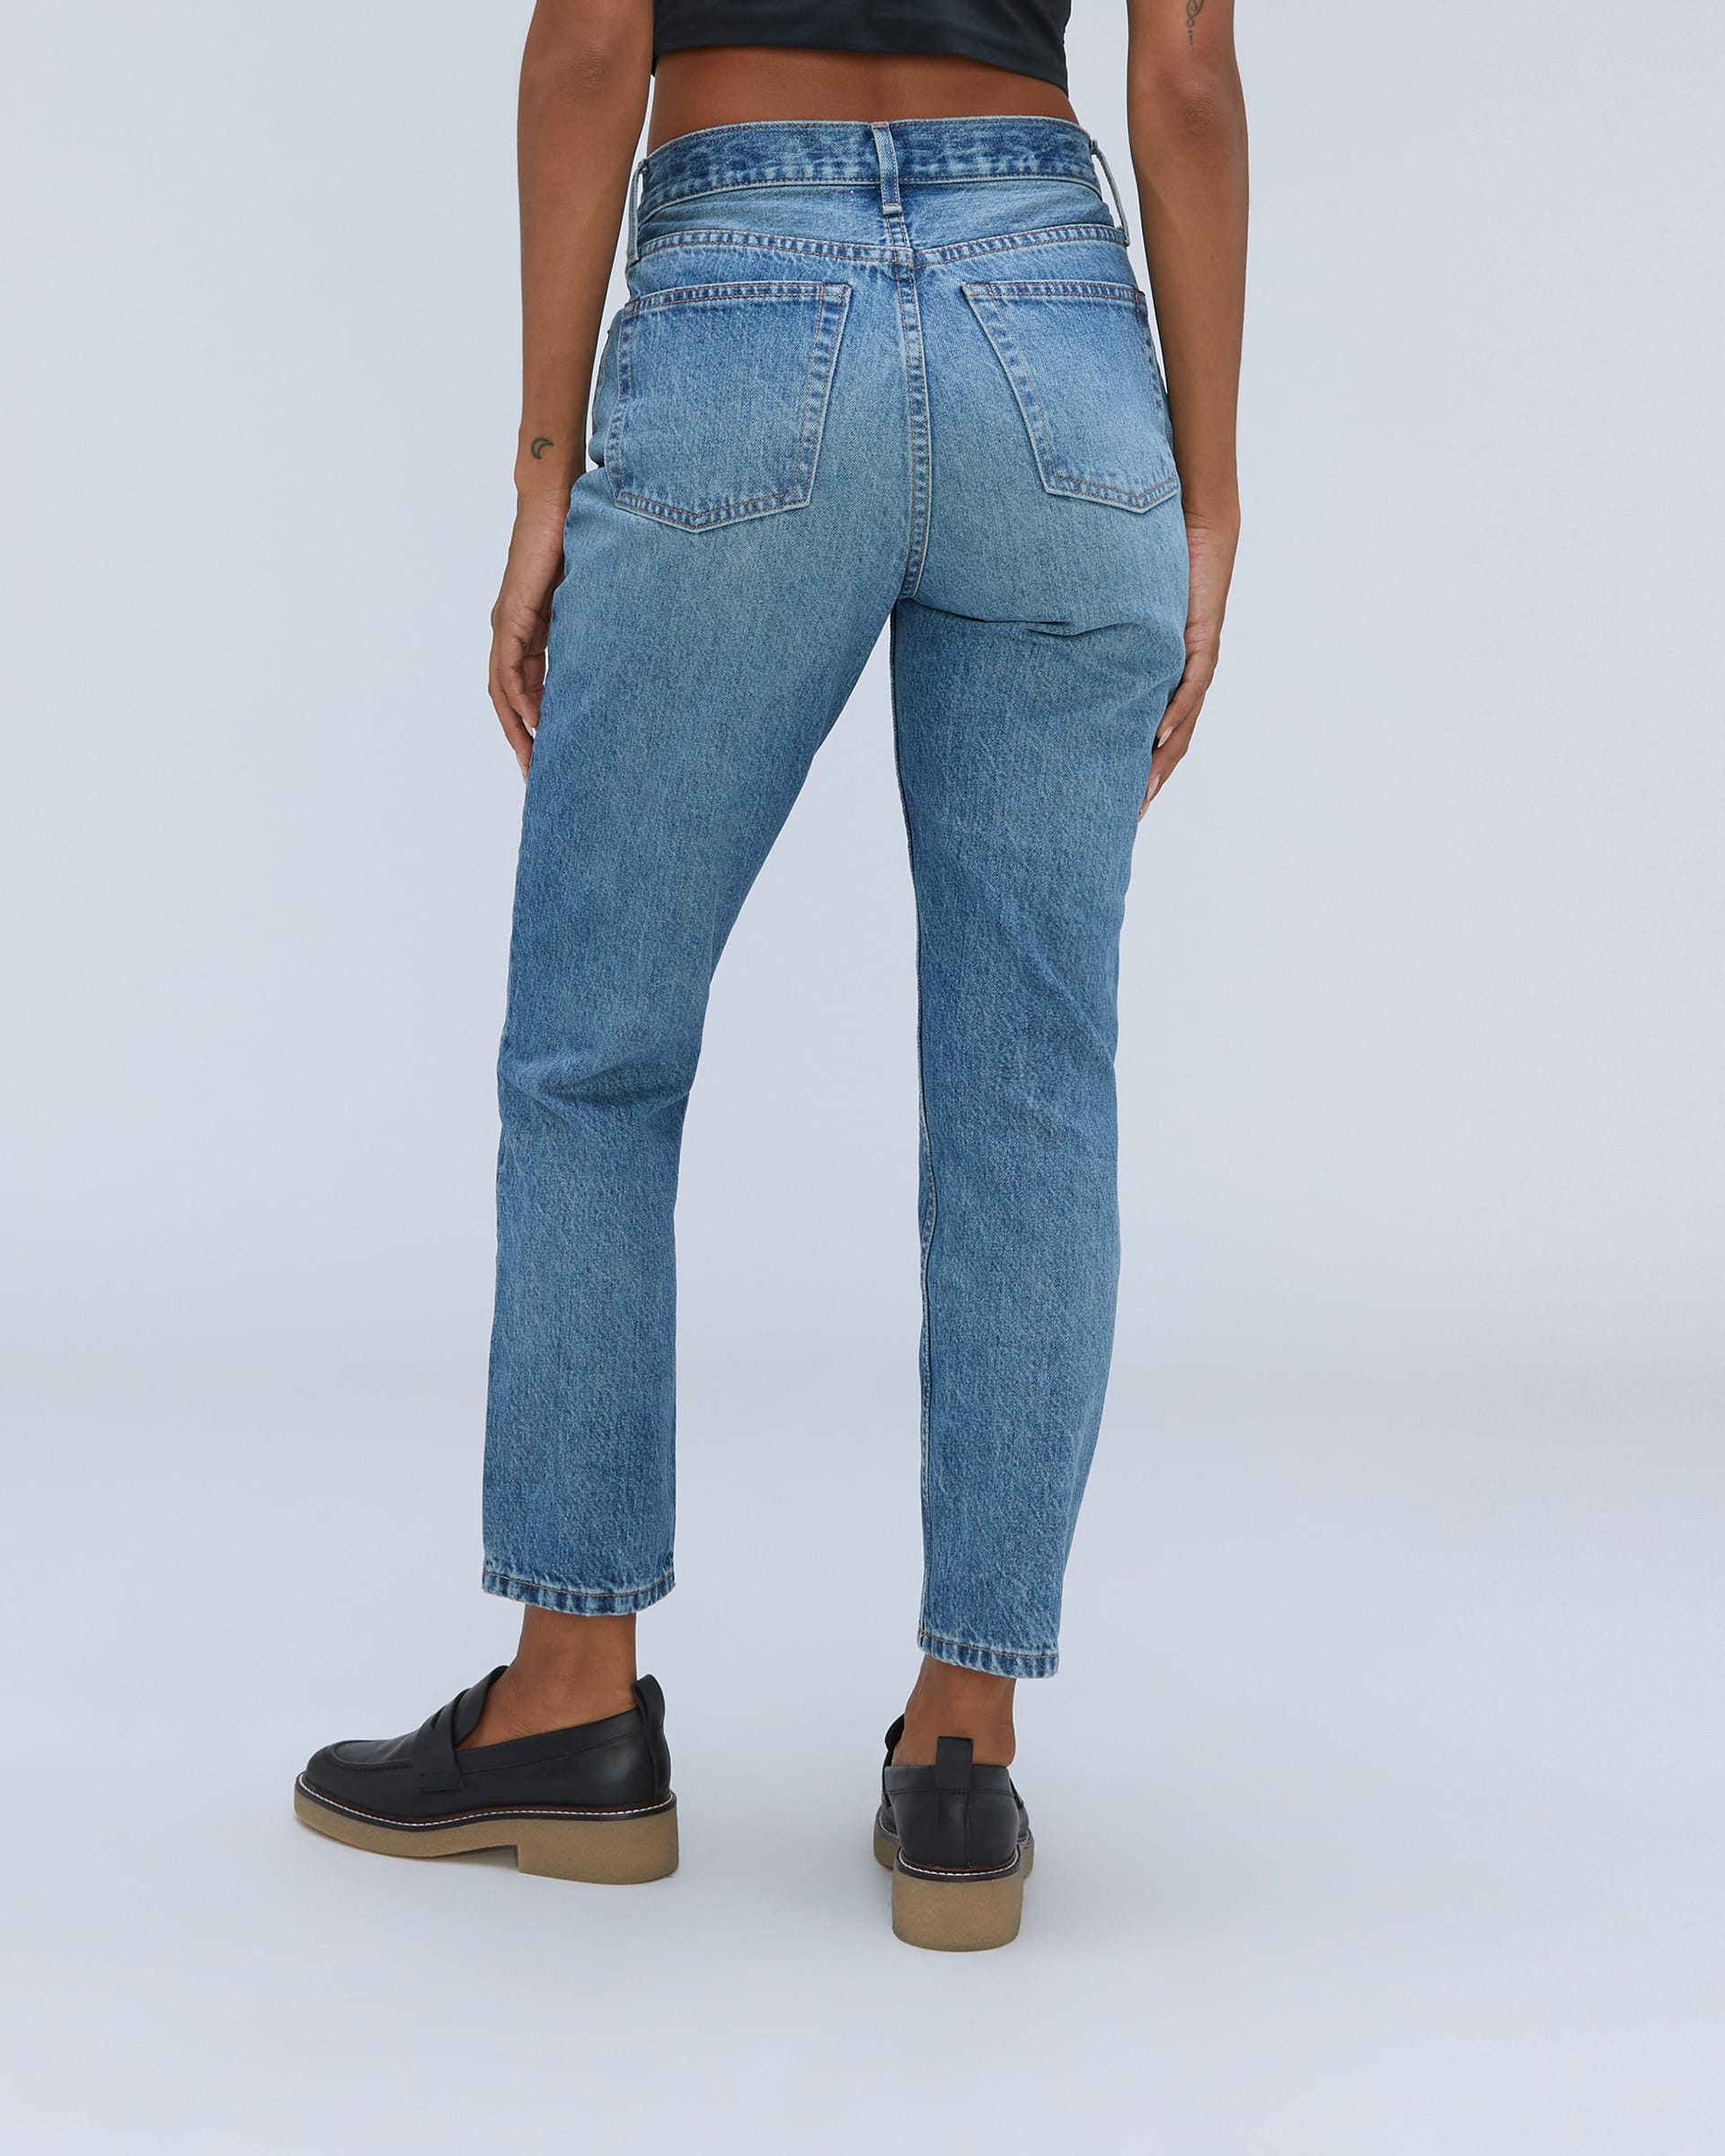 The Local ’90s Cheeky® Jean Vintage Tint – Everlane